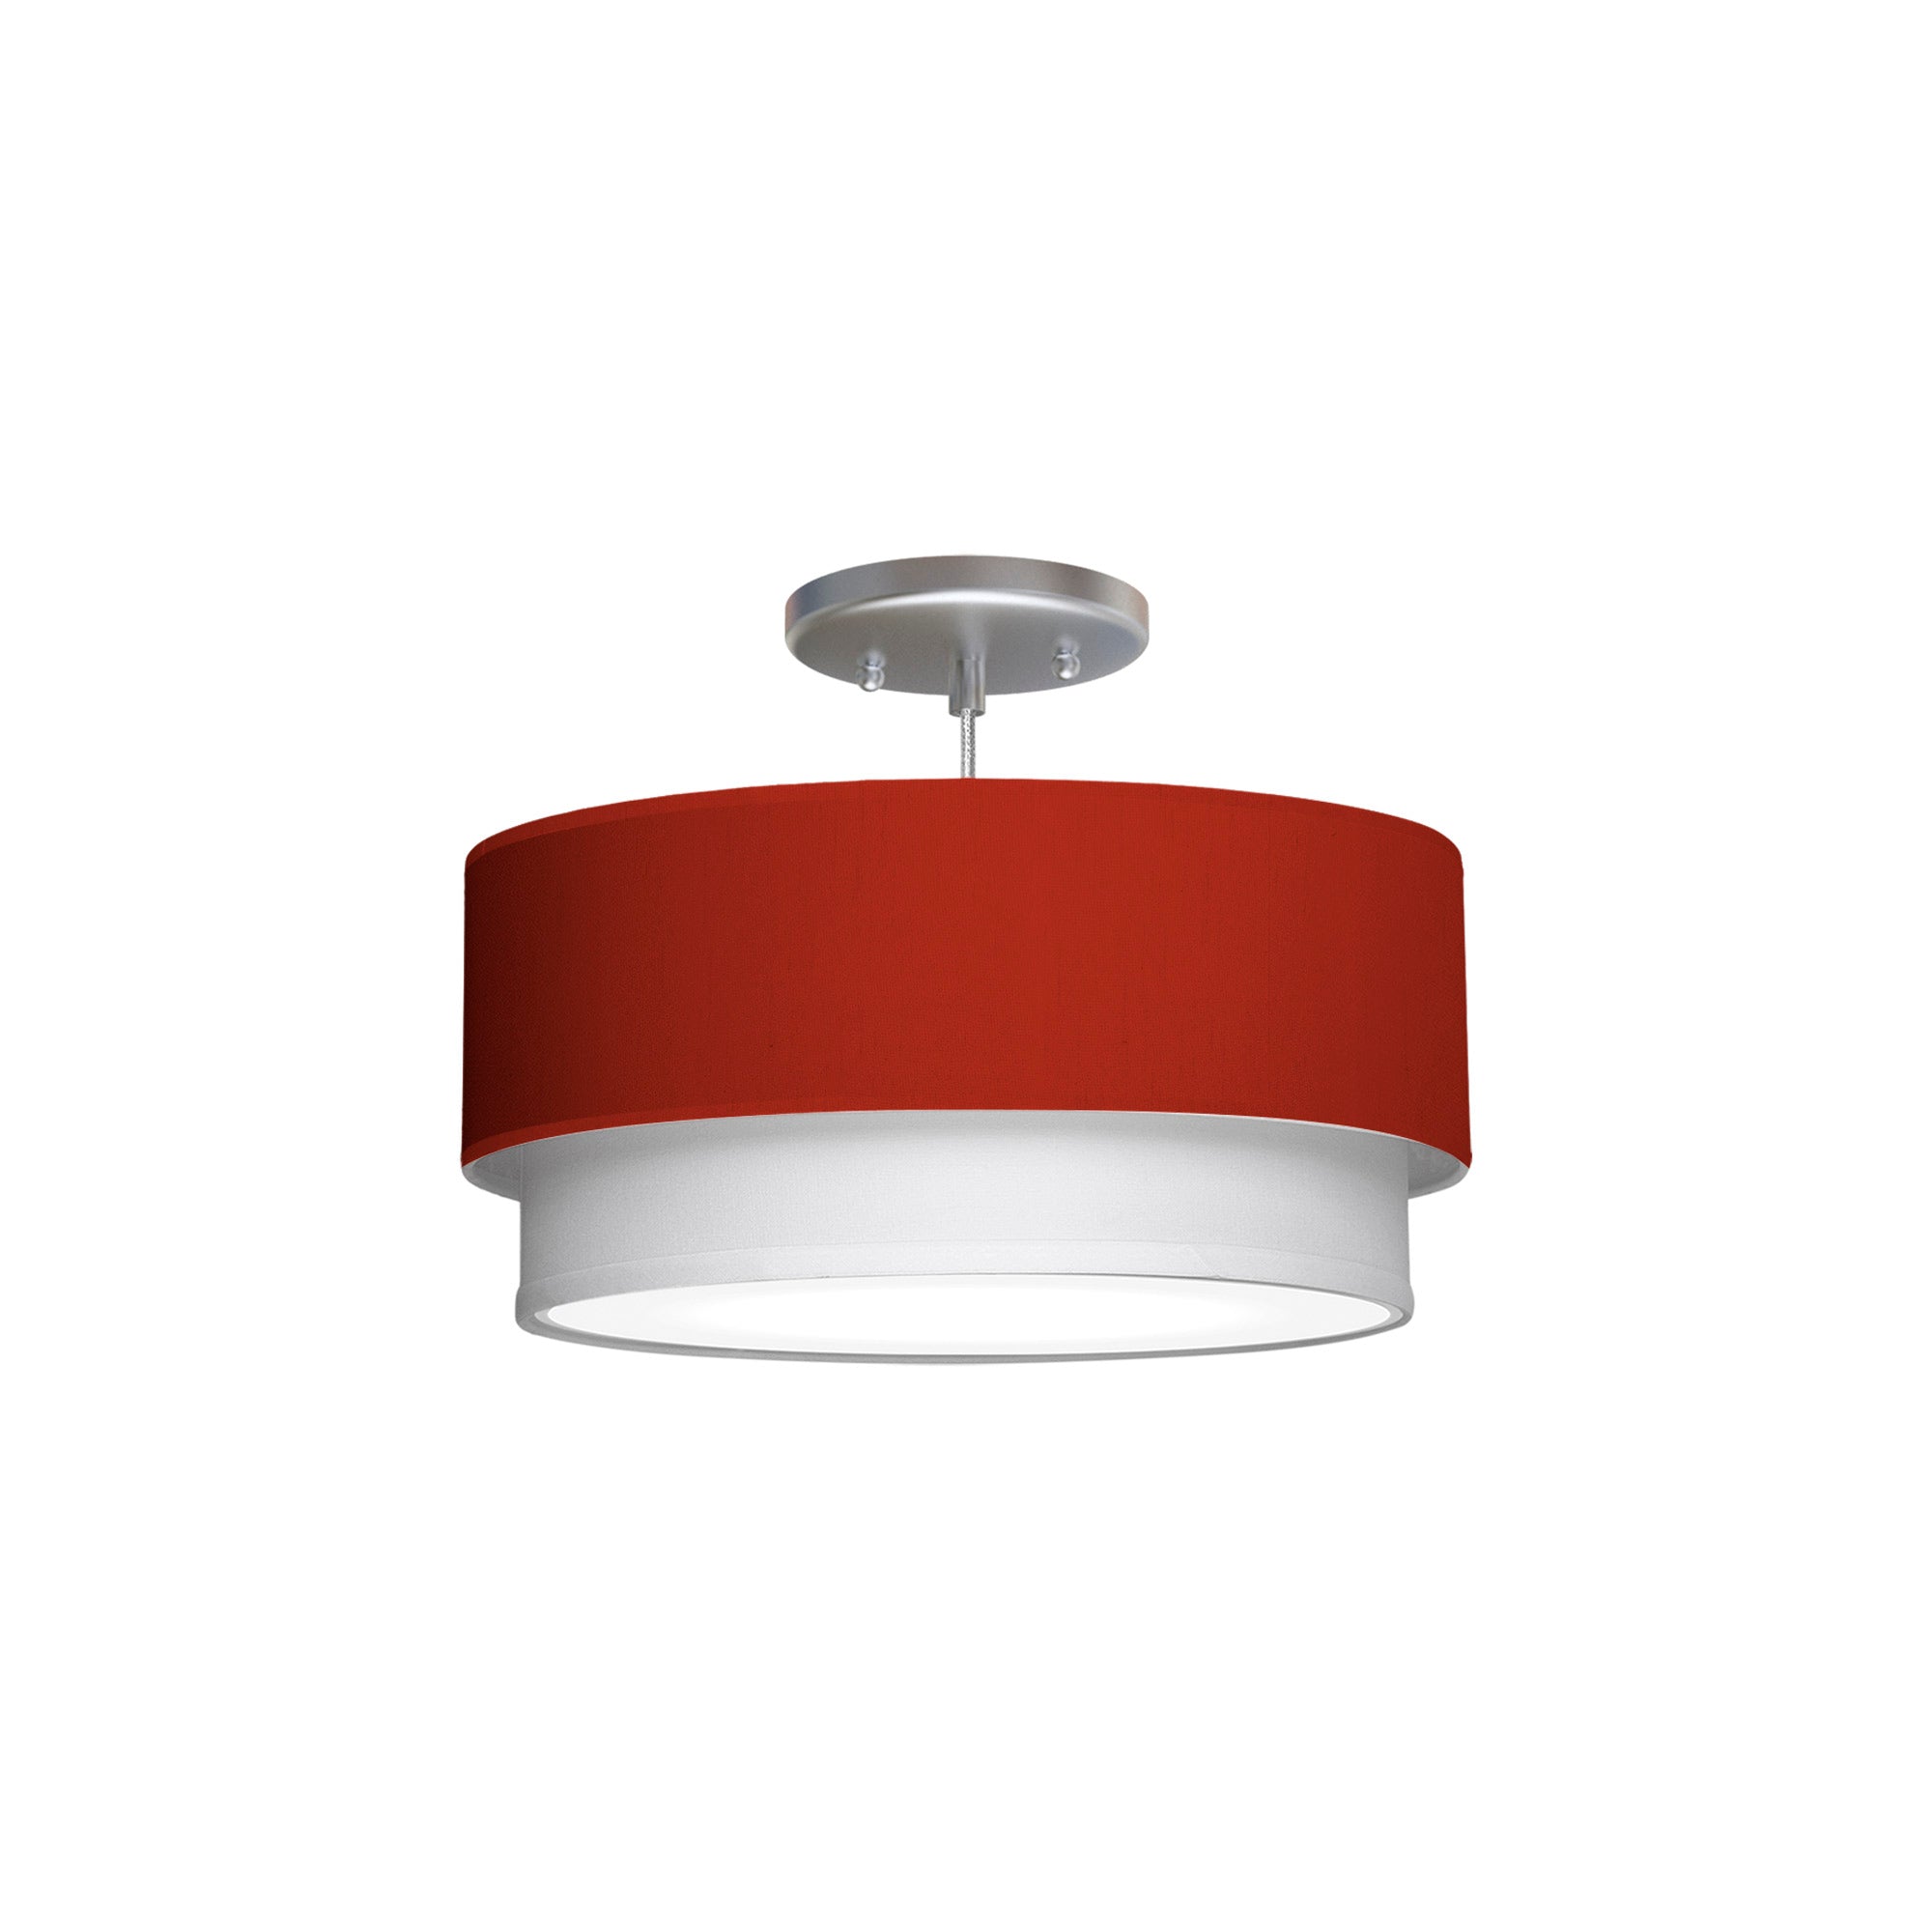 The Lenny Hanging Lamp from Seascape Fixtures with a silk shade in red color.